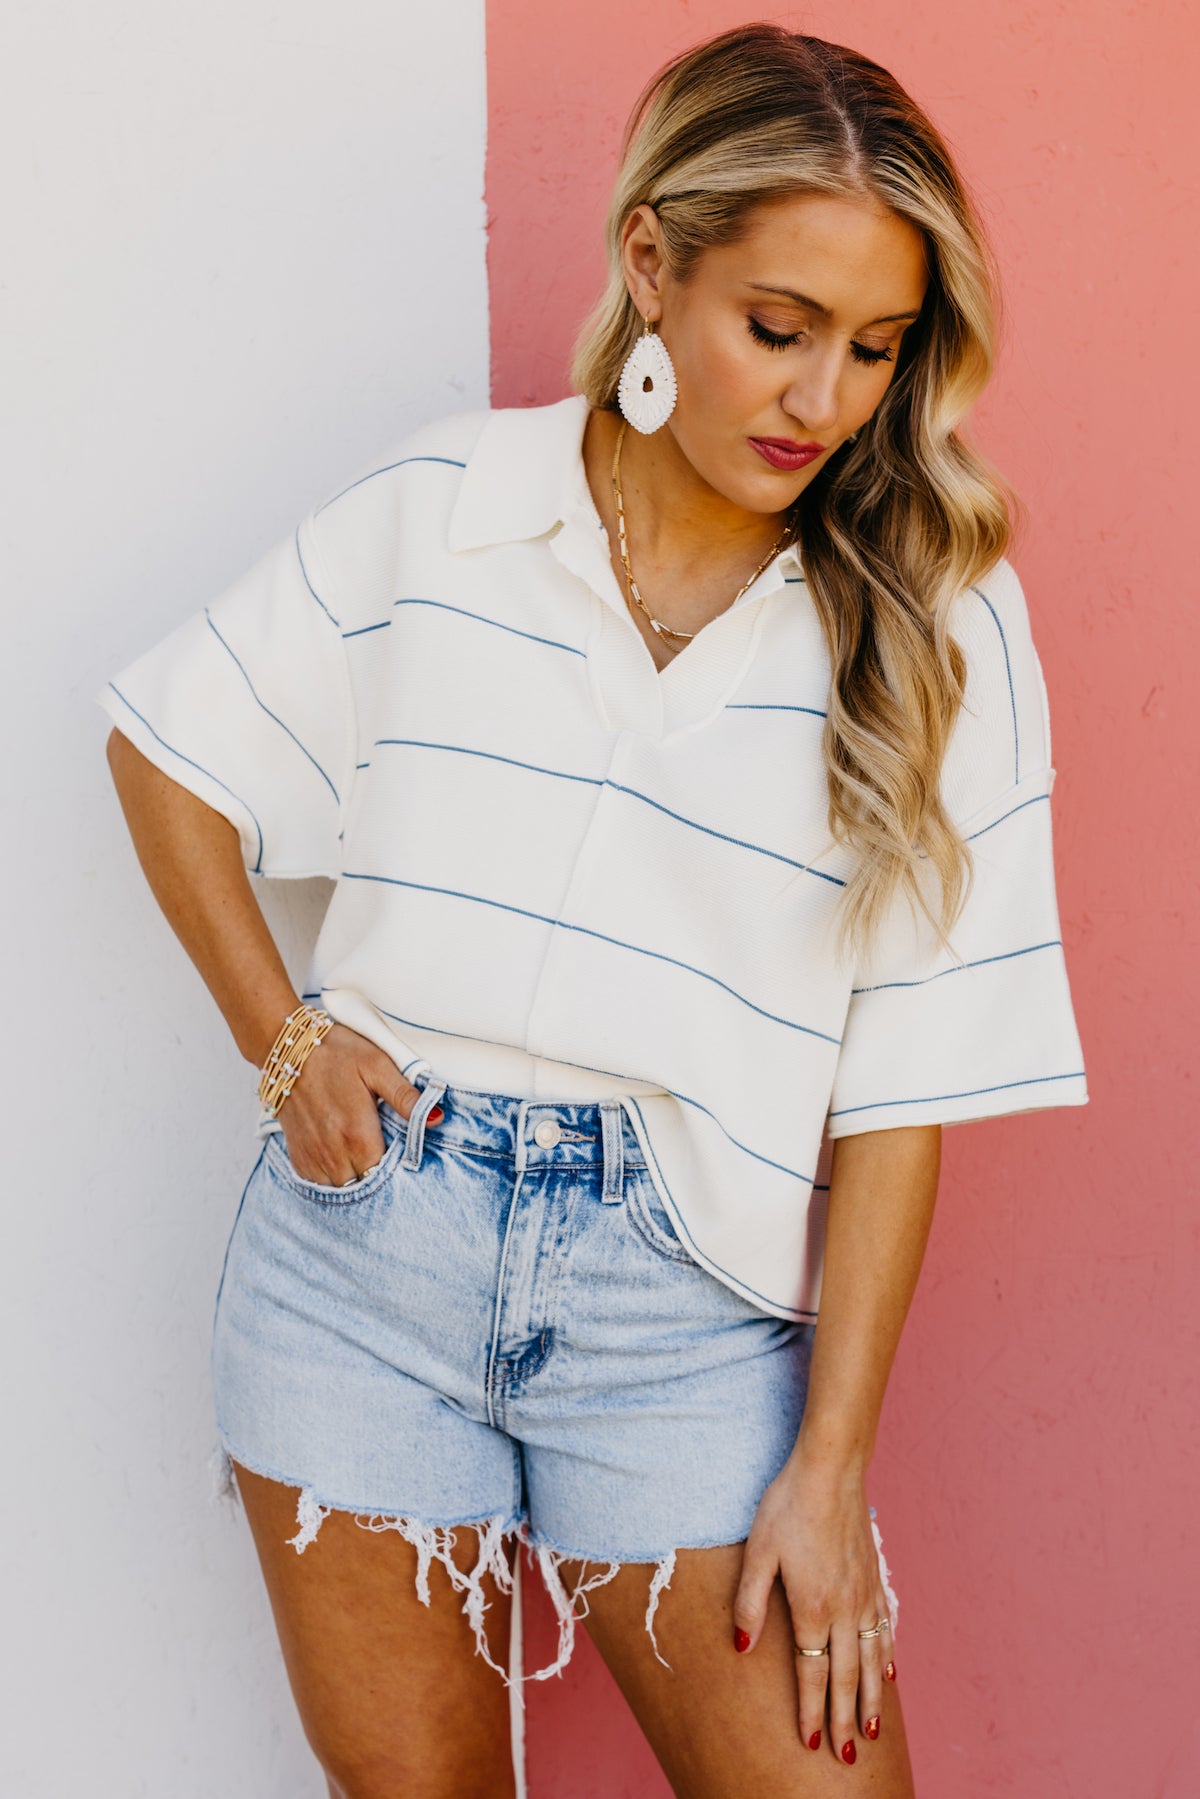 The Lawrence Striped Collar Sweater Top